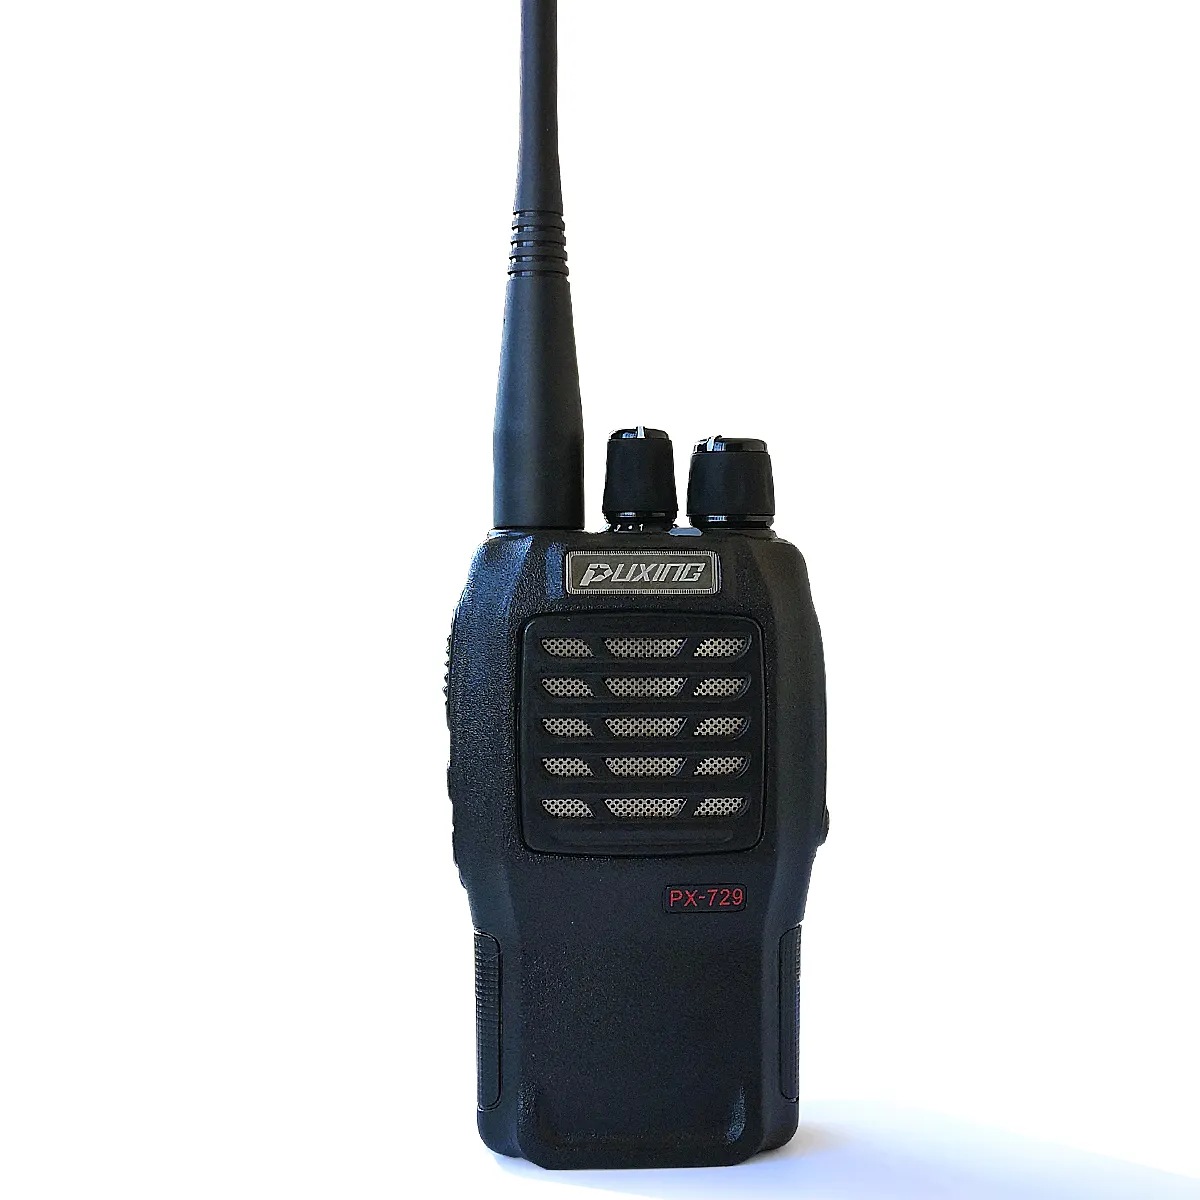 4W OEM PUXING PX-729 two way radio professional hot selling on ebay